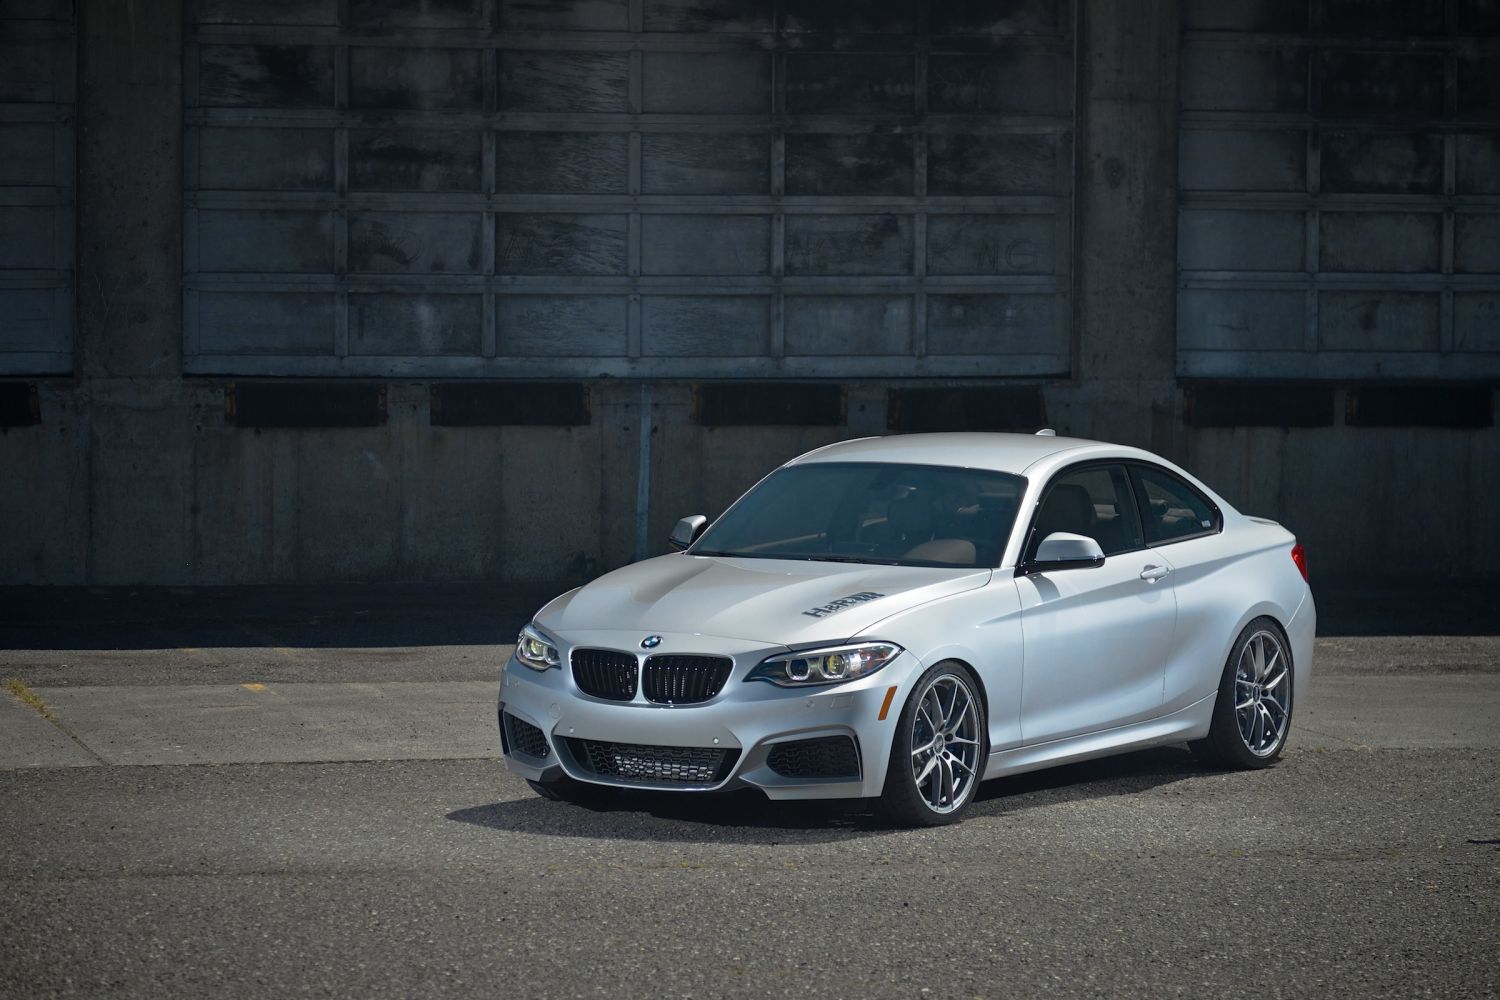 H&R 2014 BMW 228i M Sport Coupe | H&R Special Springs, LP.
